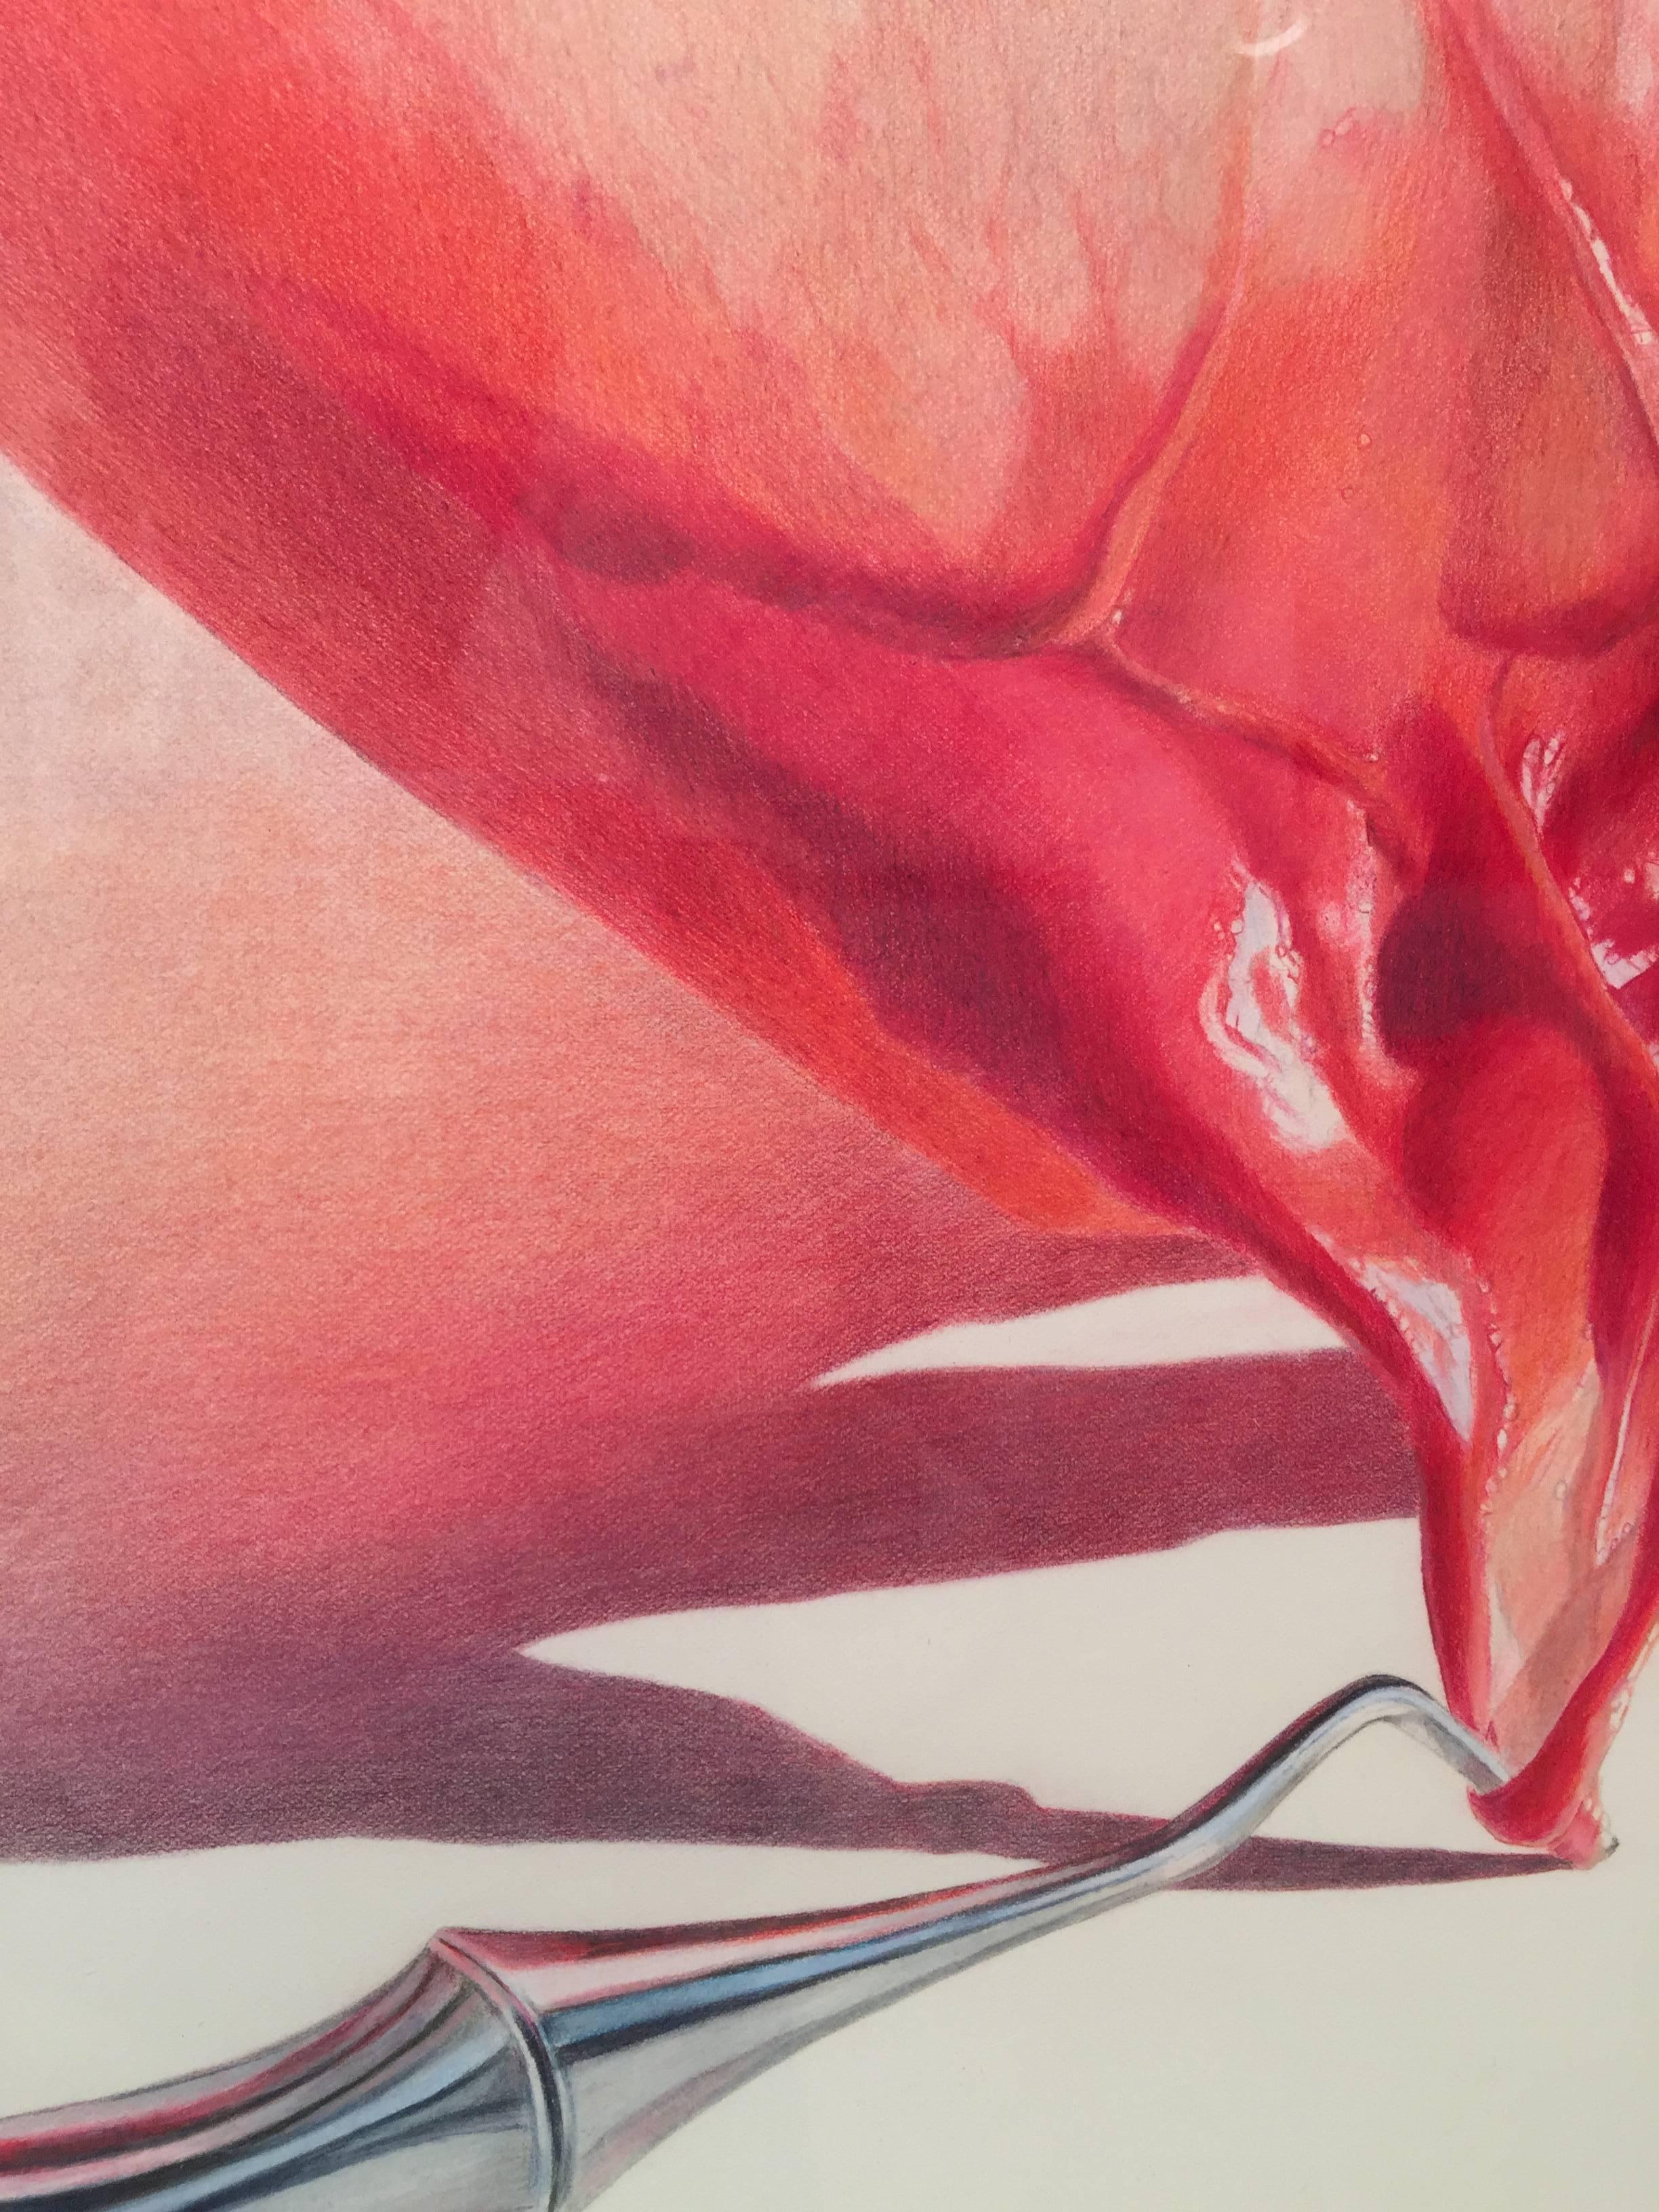 Julia Randall, Pulled Raspberry, Photorealist colored pencil drawing, 2013 3